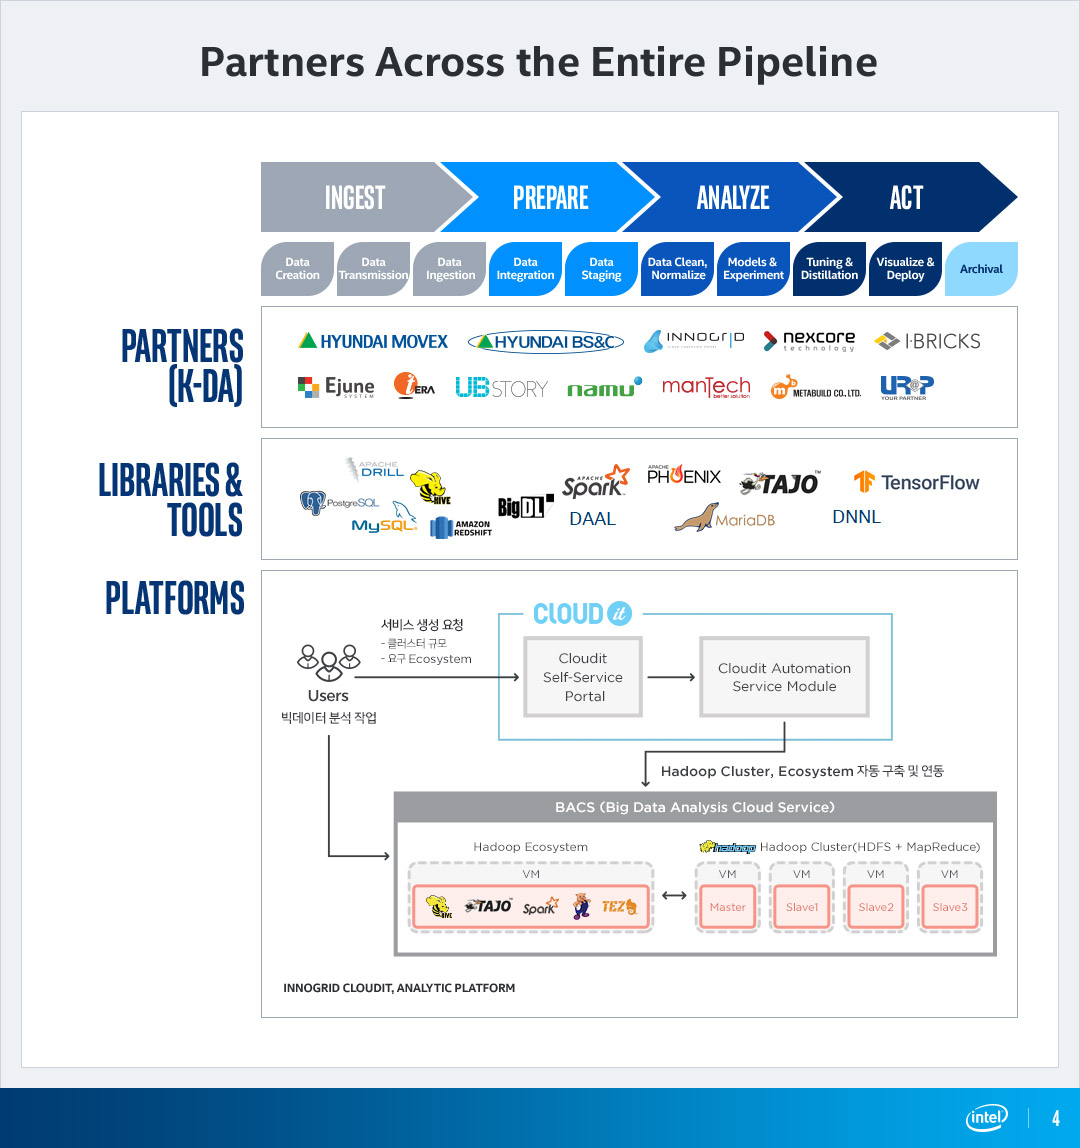 Partners Across the Entire Pipeline